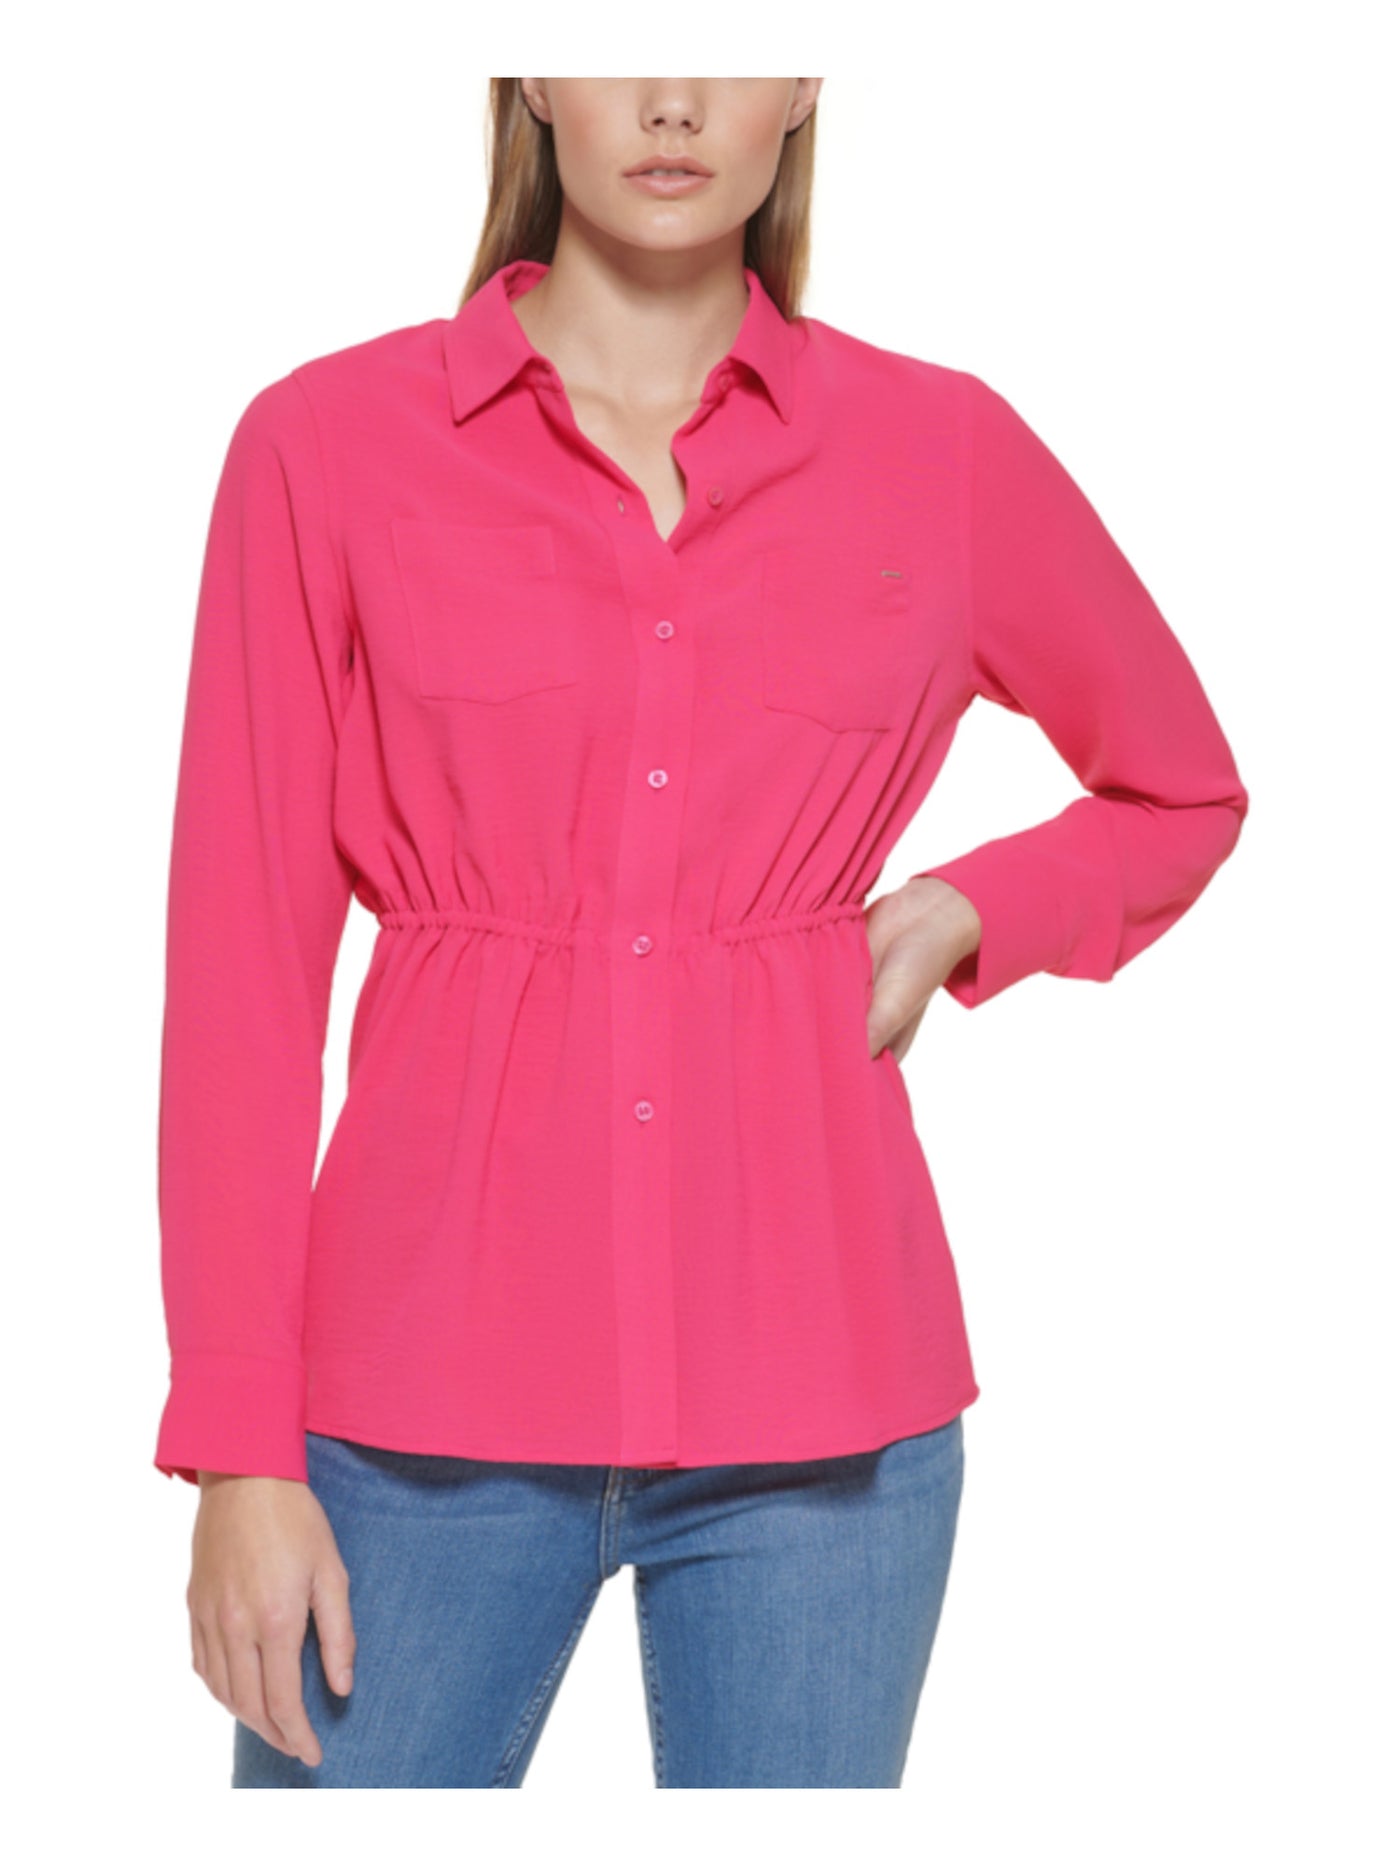 CALVIN KLEIN Womens Pink Cuffed Sleeve Collared Wear To Work Button Up Top XS